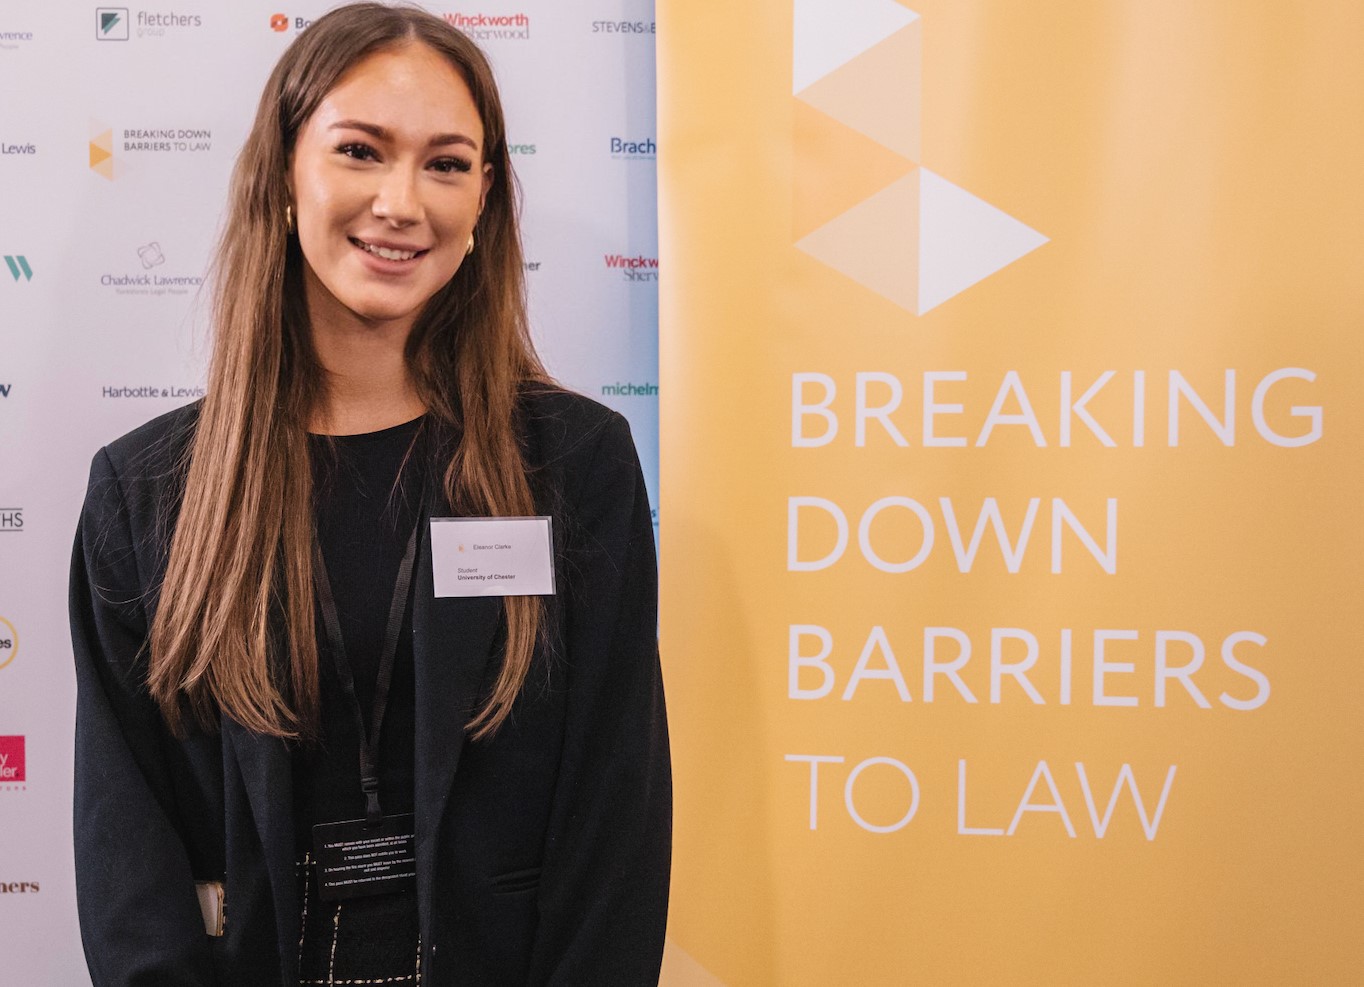 student at law social capital event